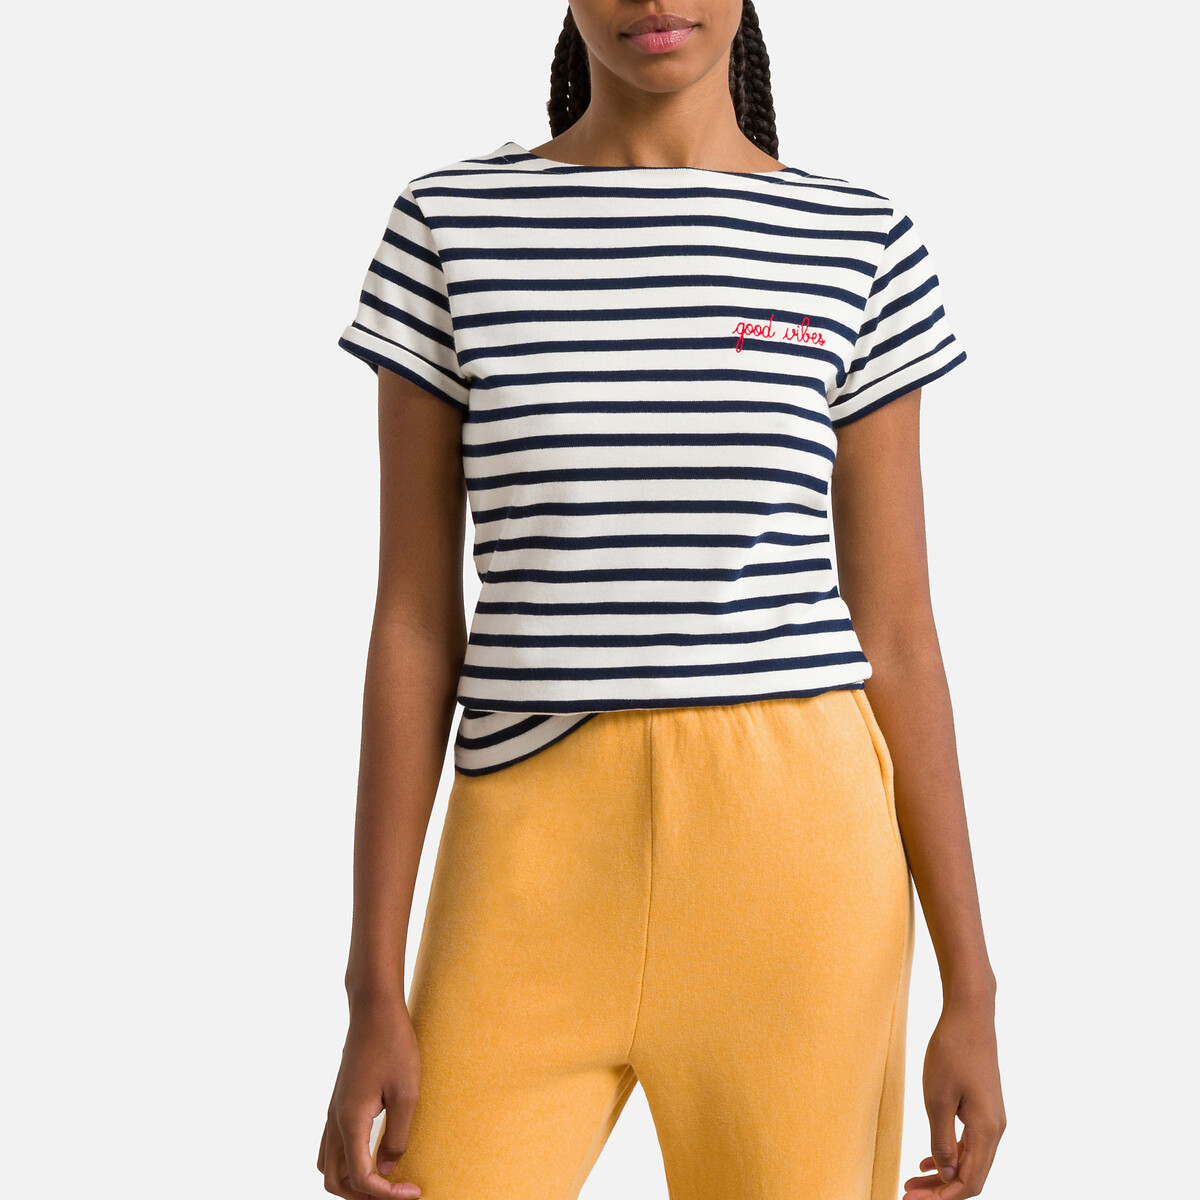 Colombier Breton Striped T-Shirt in Organic Cotton with Good Vibes Embroidery